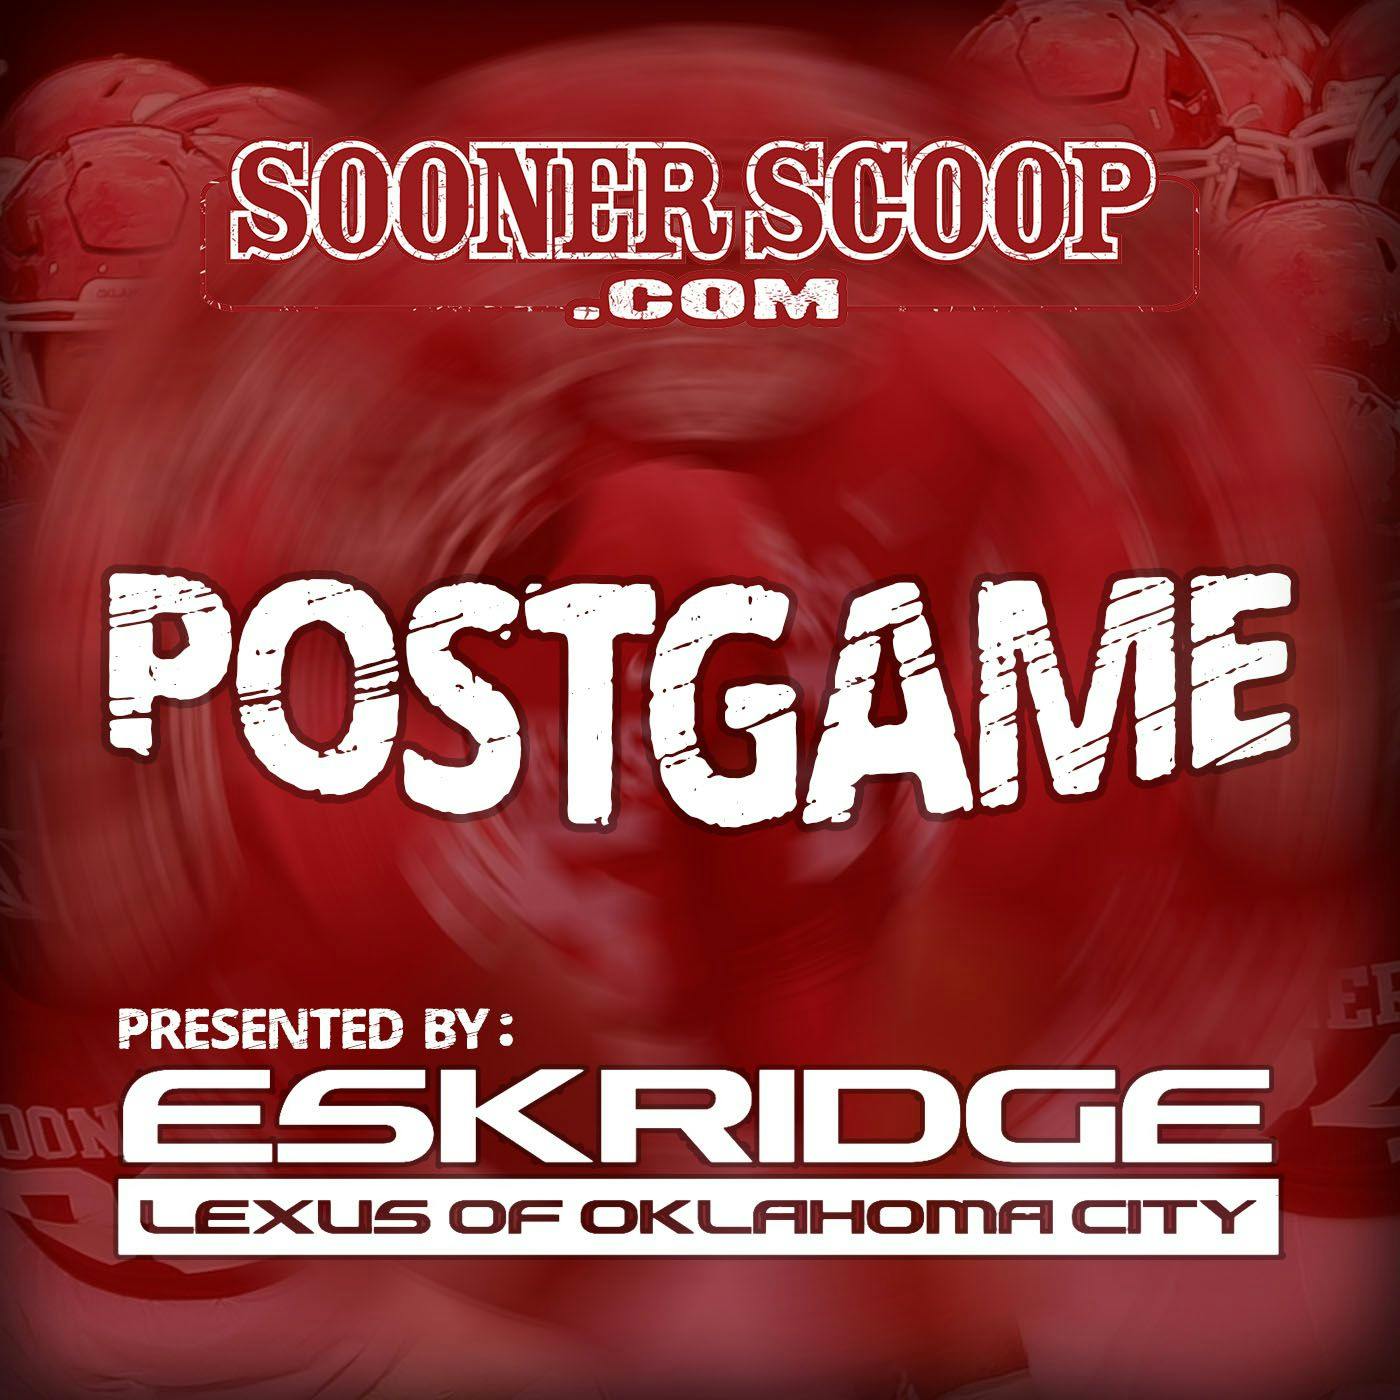 POSTGAME: OU wins 16-13, but tonight will always be Rattler’s boo bird game